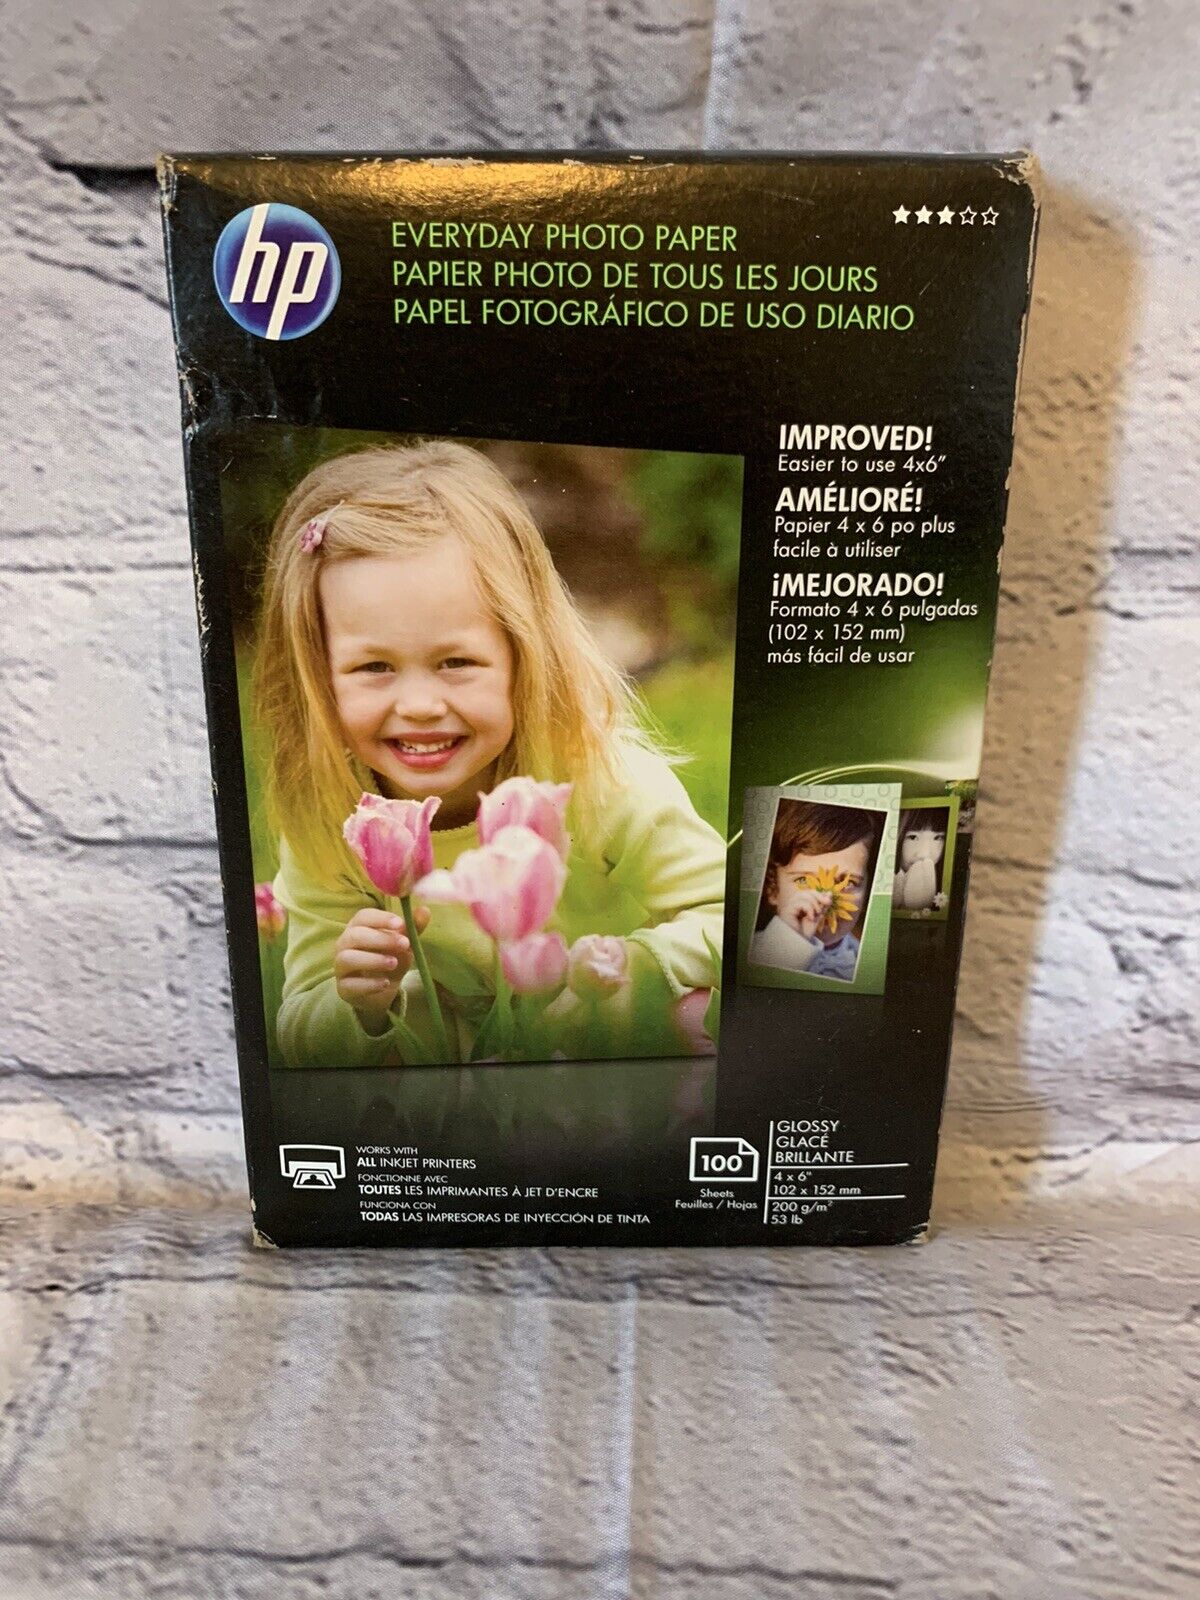 HP Genuine Everyday Photo Paper 100 Sheets 4x6 Glossy Sealed-NEW IN BOX.